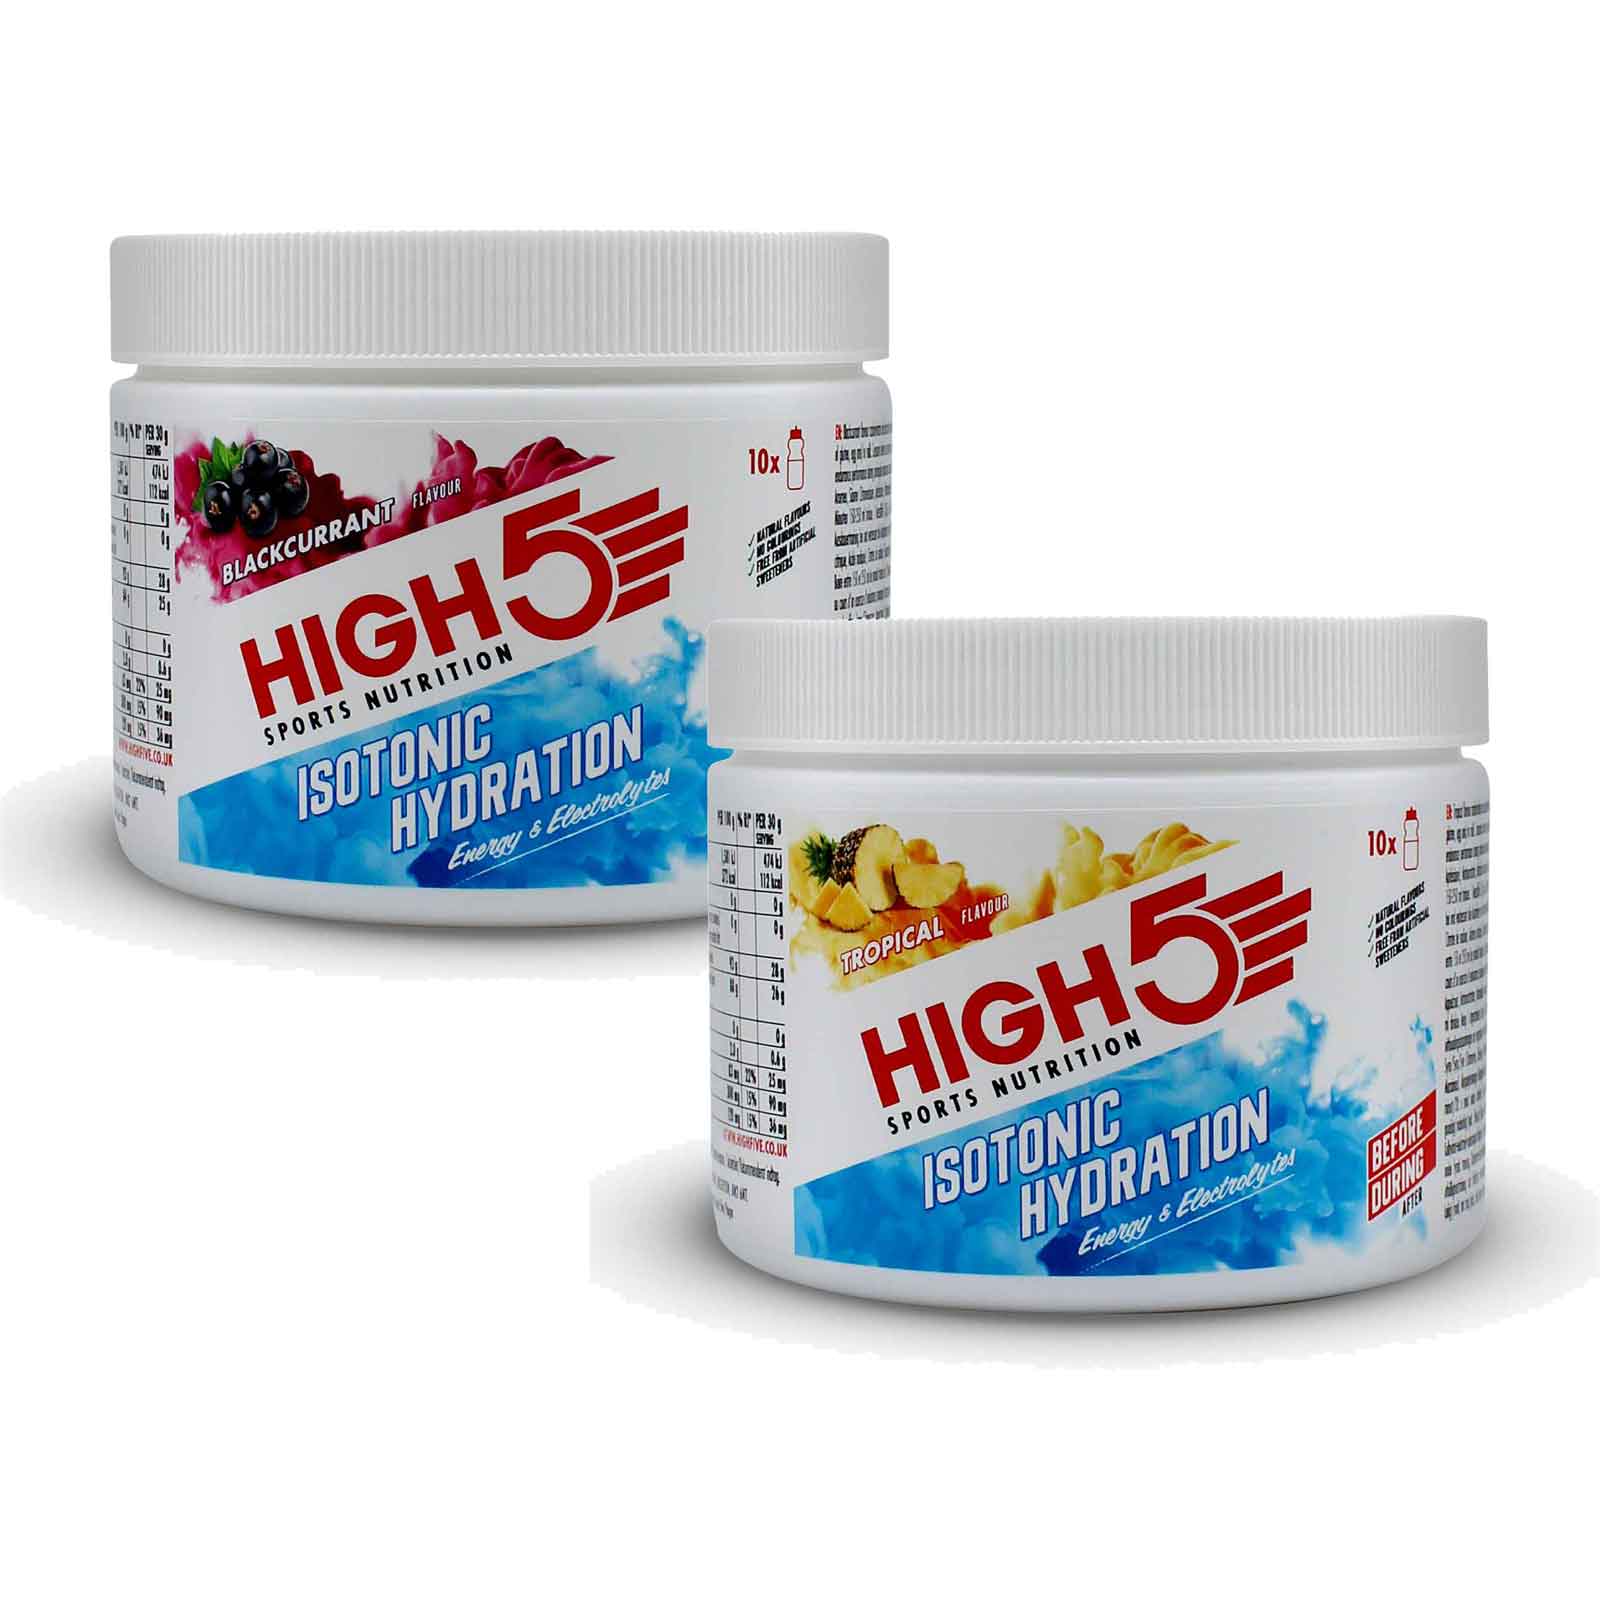 Picture of High5 Isotonic Hydration - Carbohydrate Beverage Powder - 300g